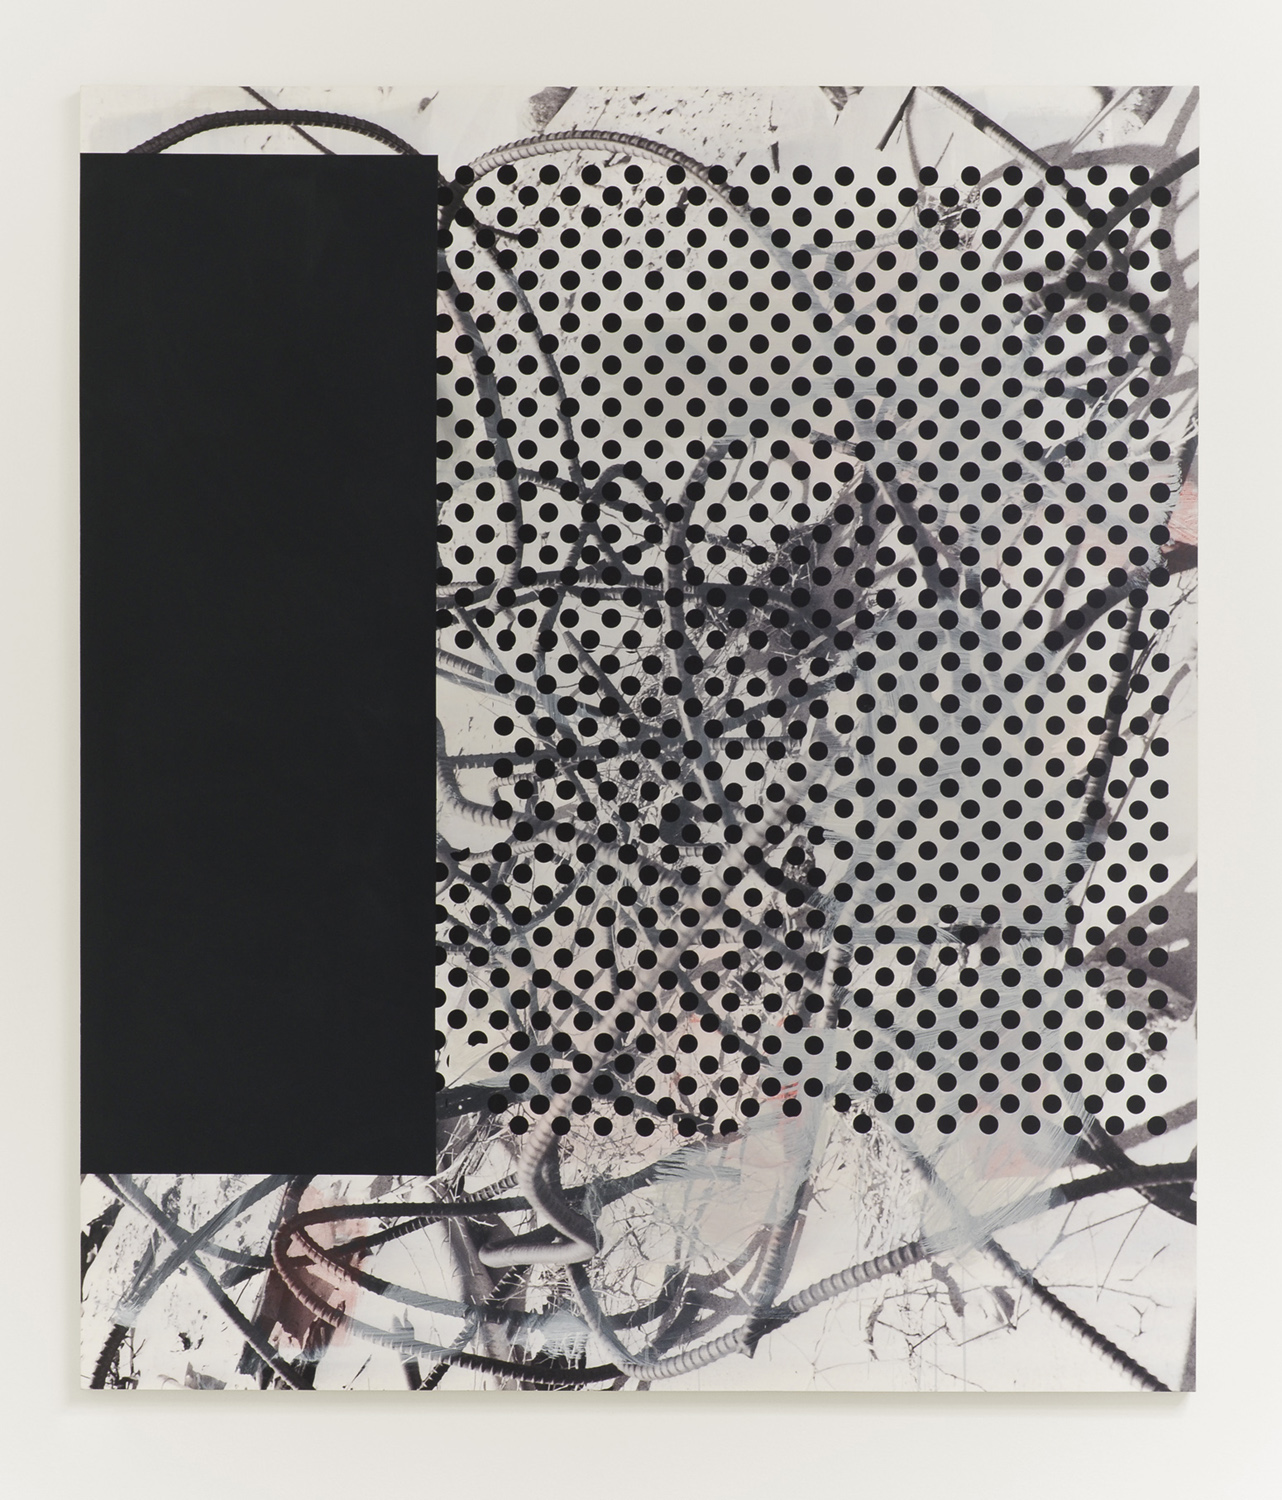  Untitled (rebar 8), 2013  Acrylic, oil and UV cured ink on canvas over panel  84 x 72 inches  213.36 x 182.88 cm       